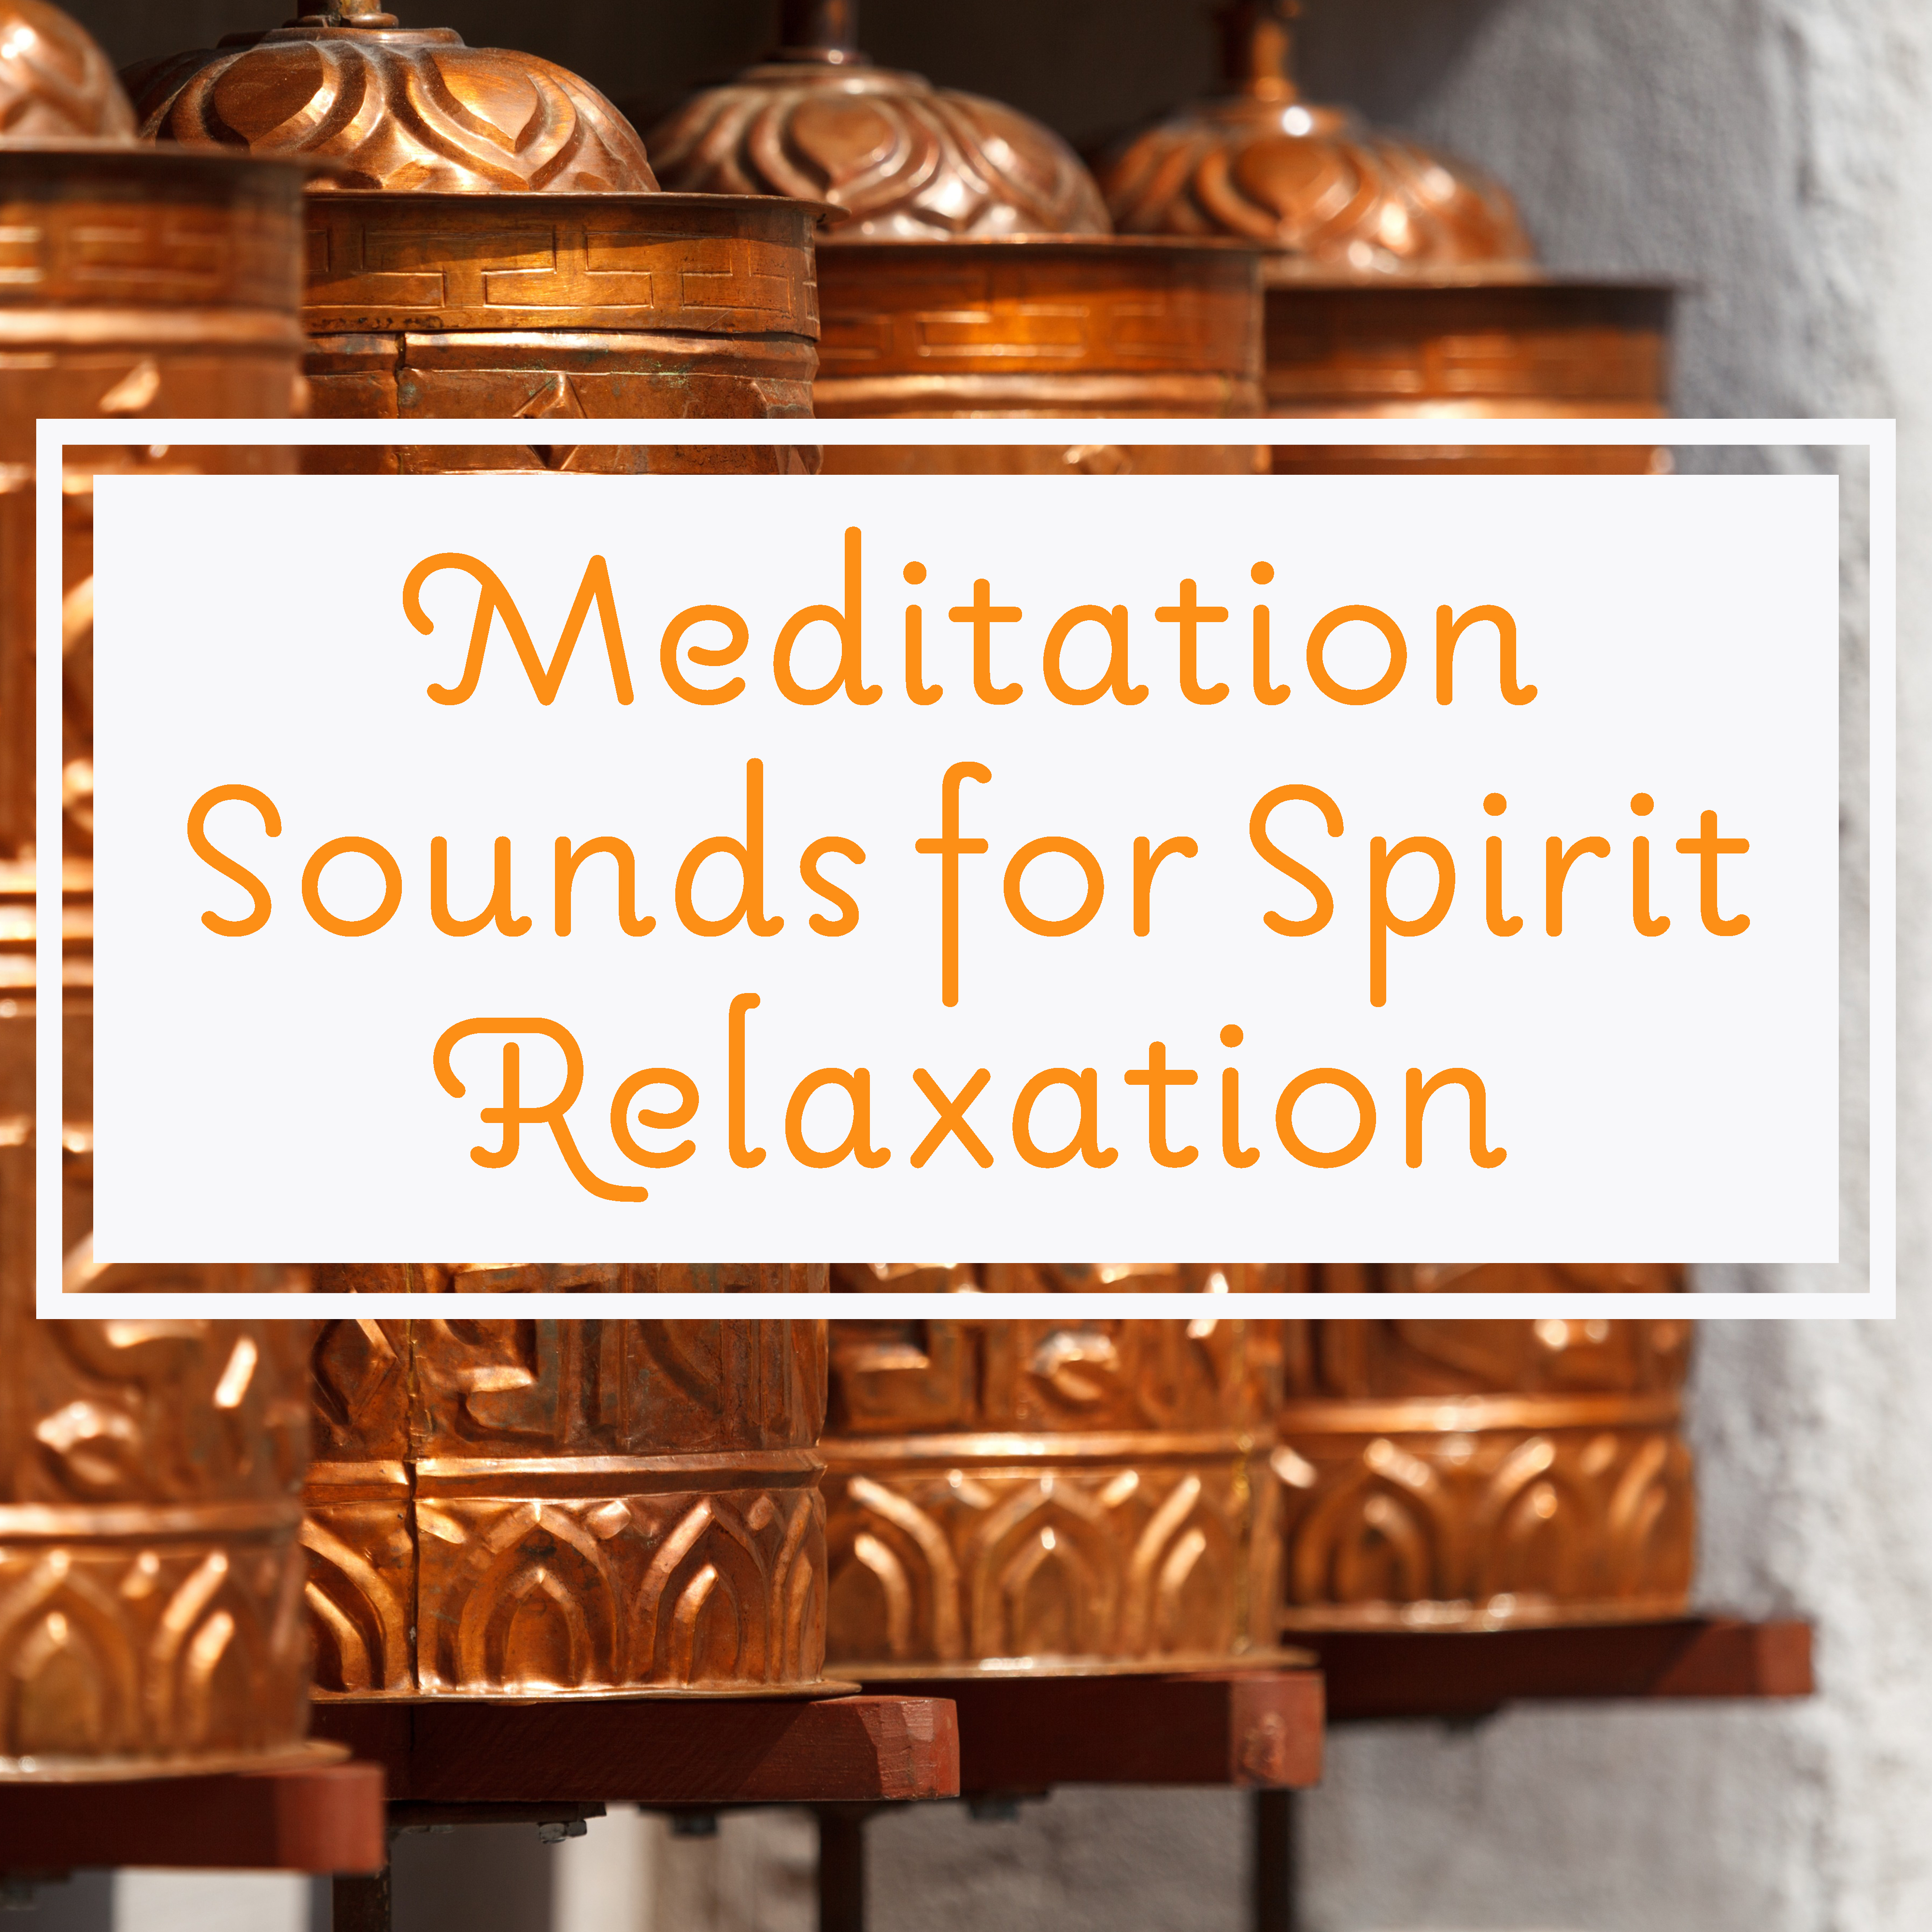 Meditation Sounds for Spirit Relaxation – Calm Down & Meditate, Peaceful Sounds to Relax, Buddha Lounge